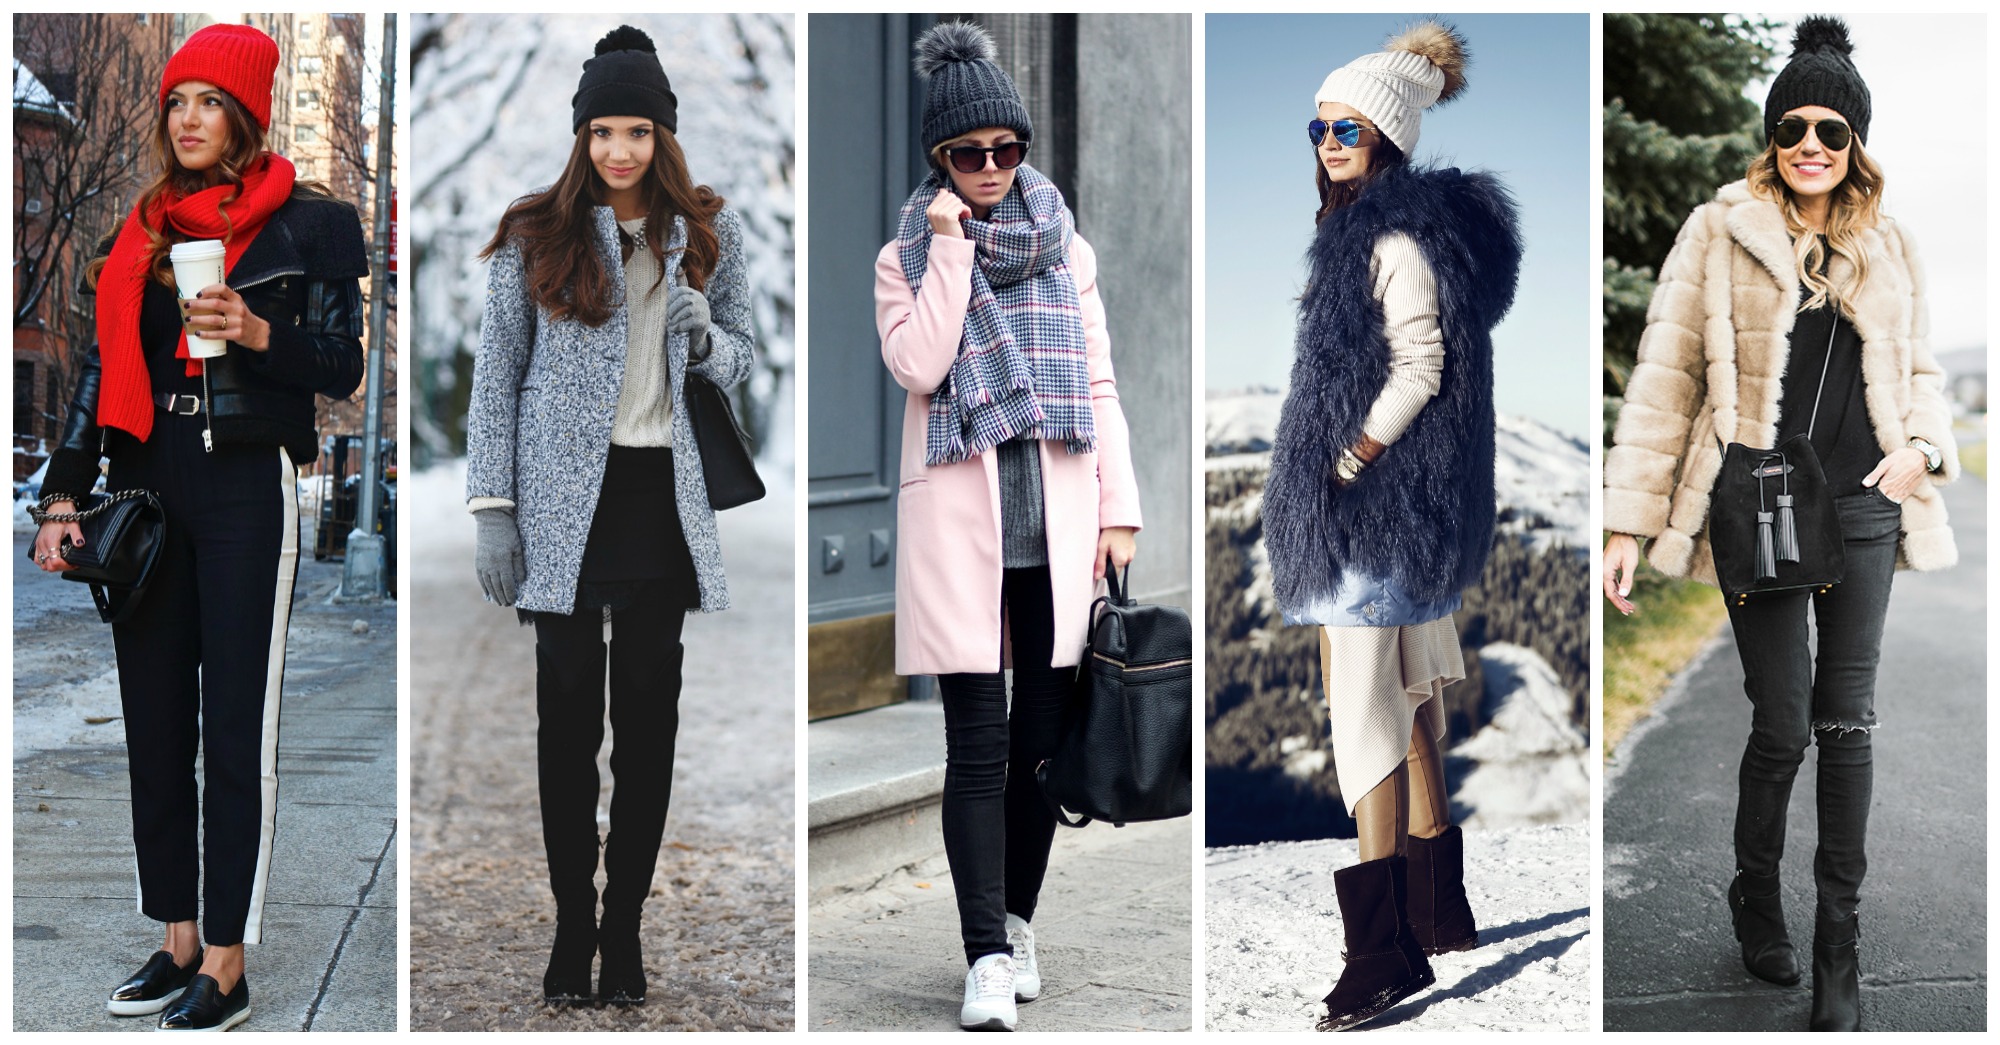 Outstanding Winter Outfits With Beanies That Will Keep You Warm